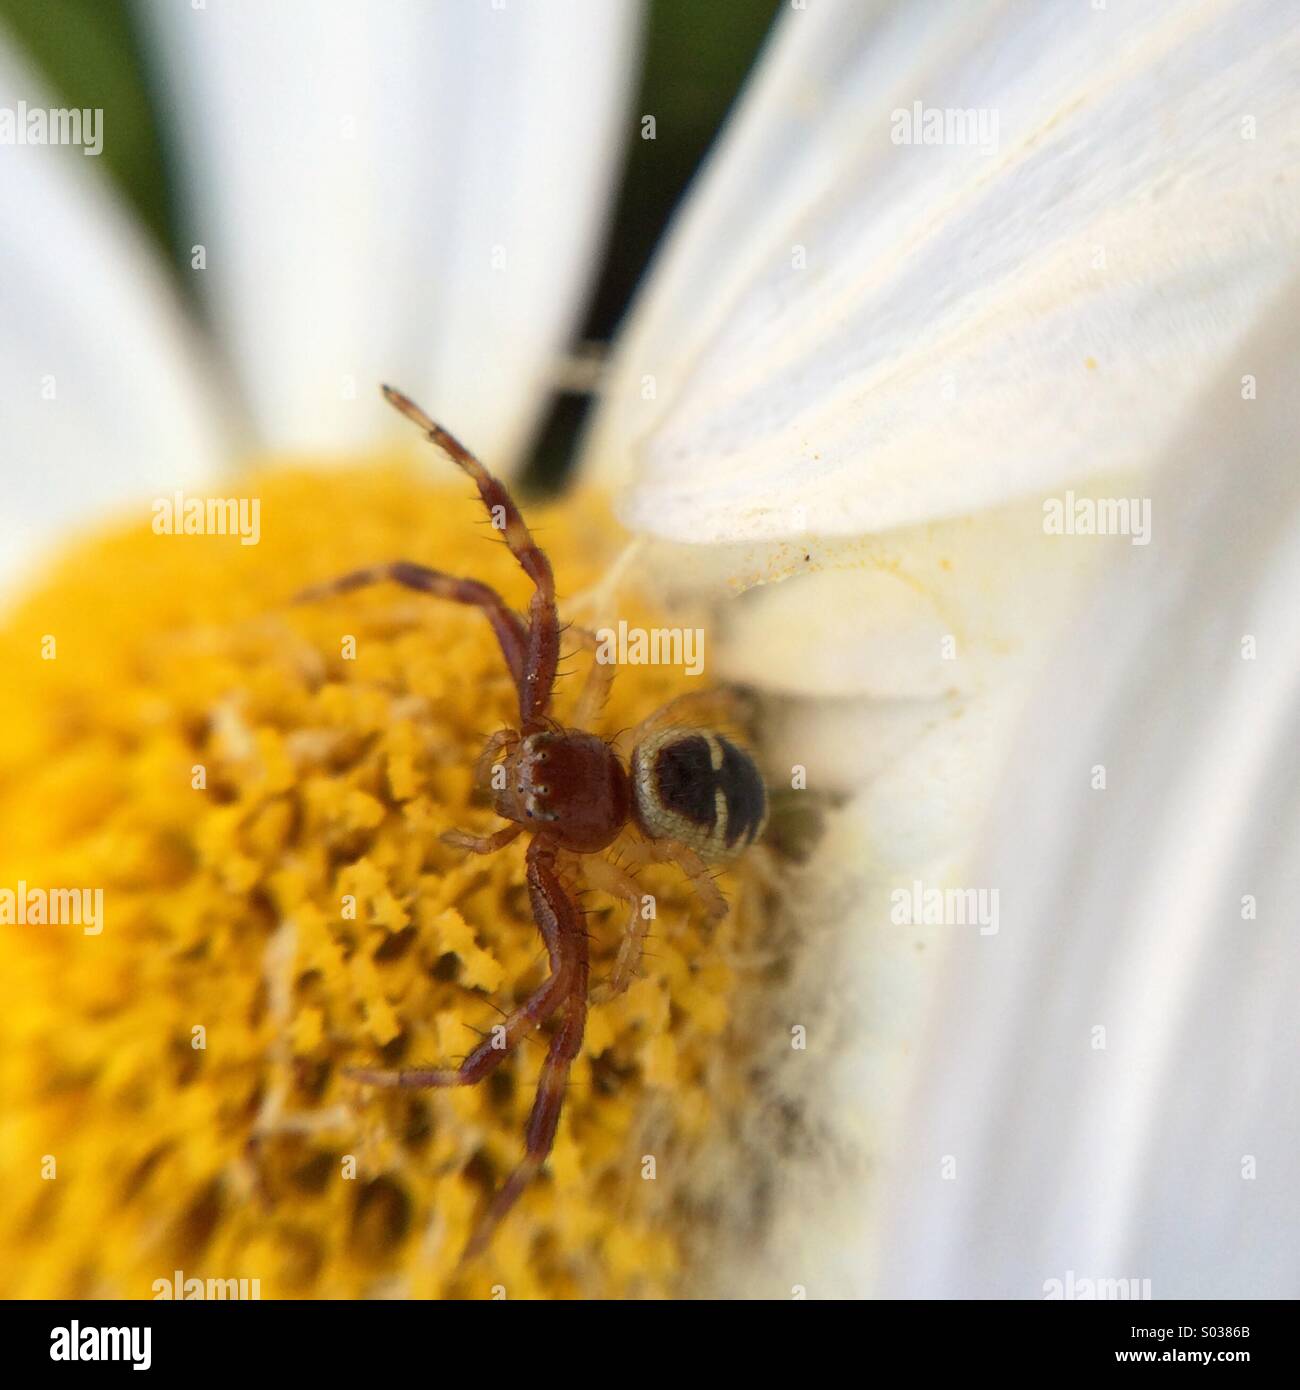 Macro of a spider on a daisy. Stock Photo